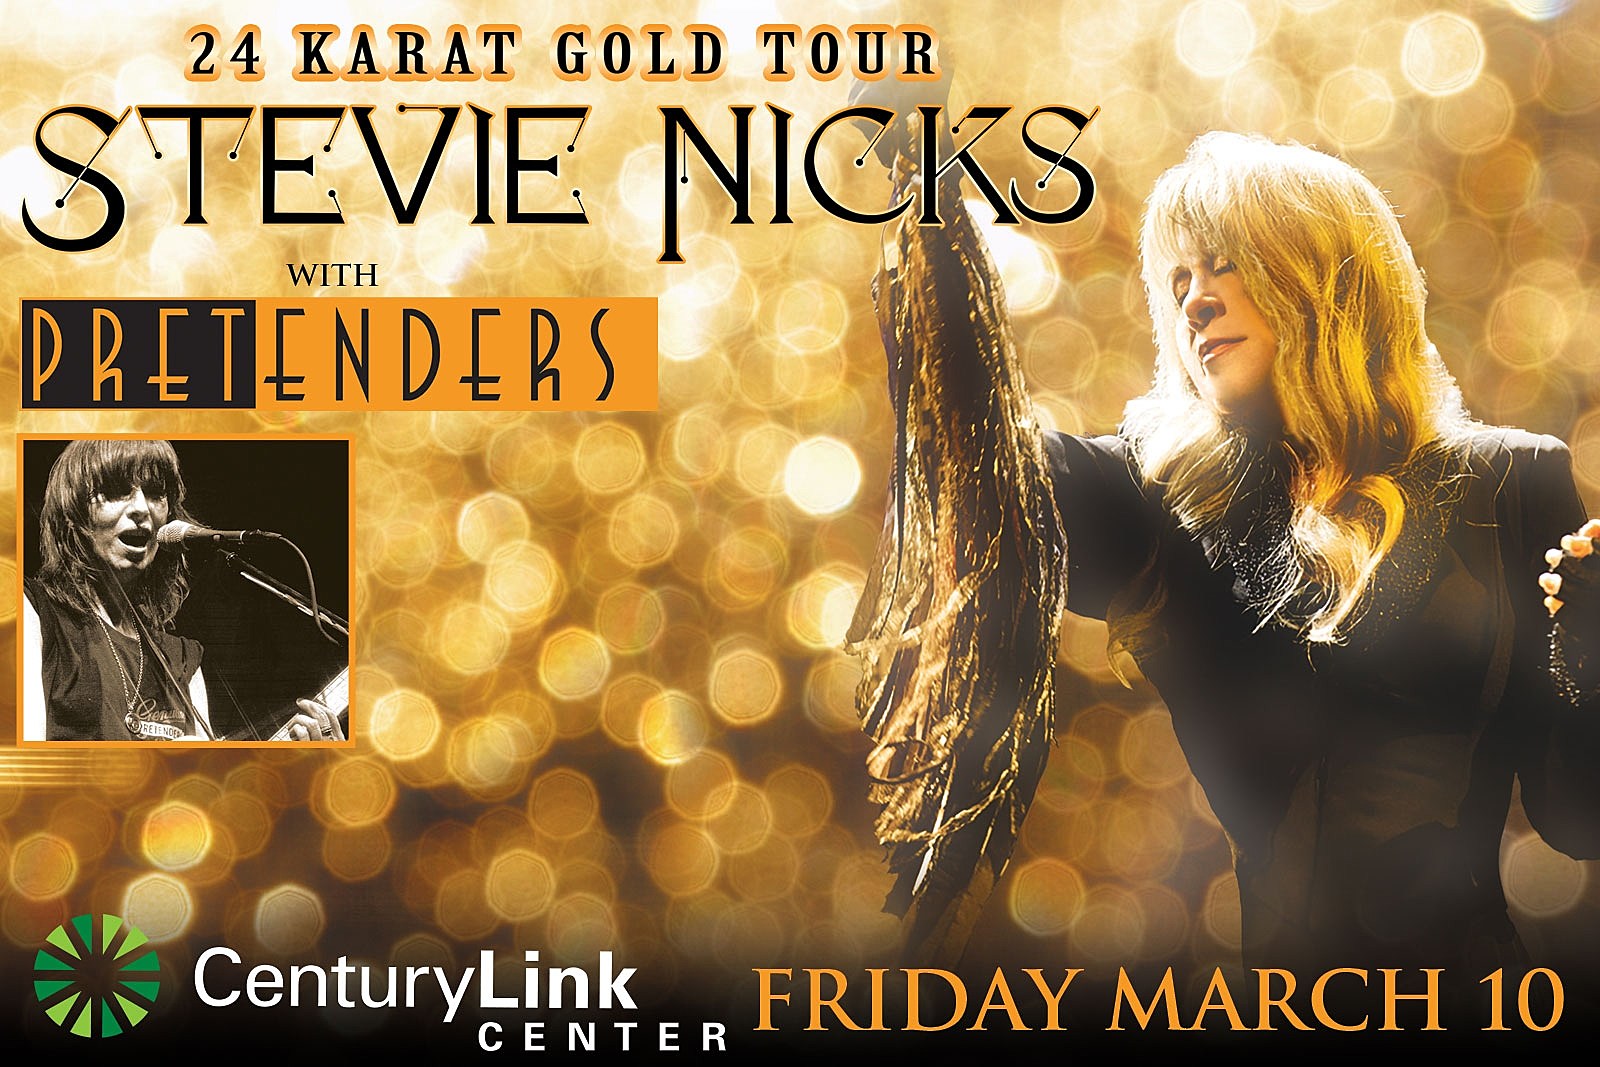 stevie nicks and the pretenders tickets